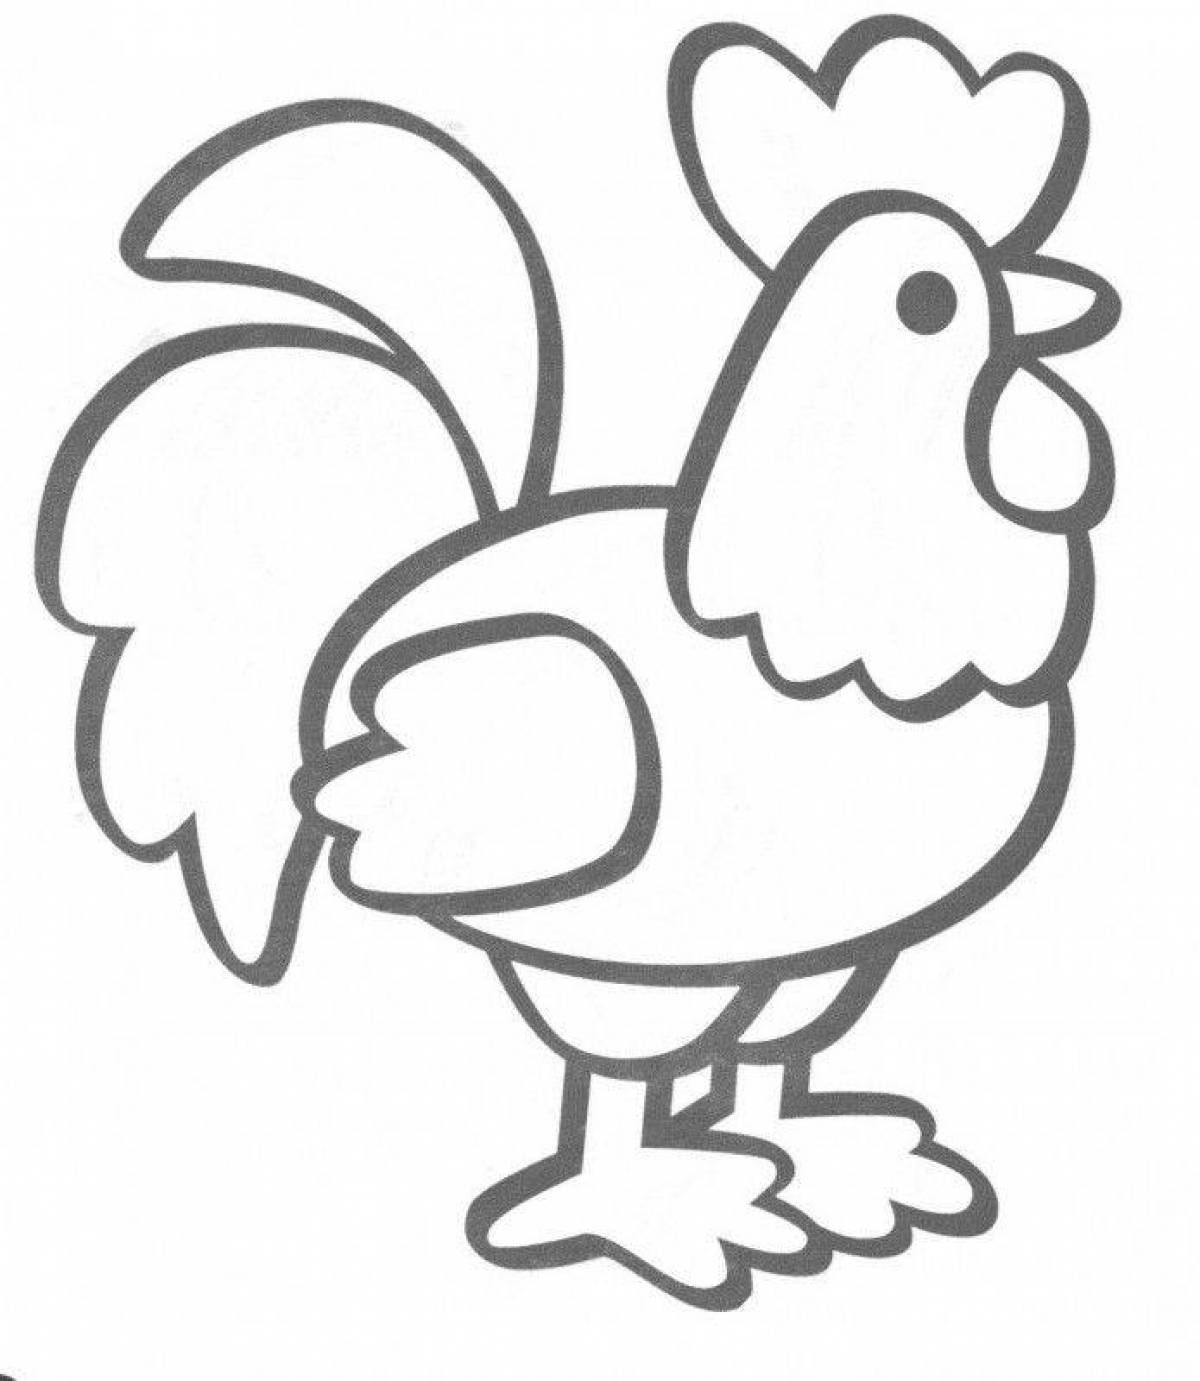 Rooster coloring page